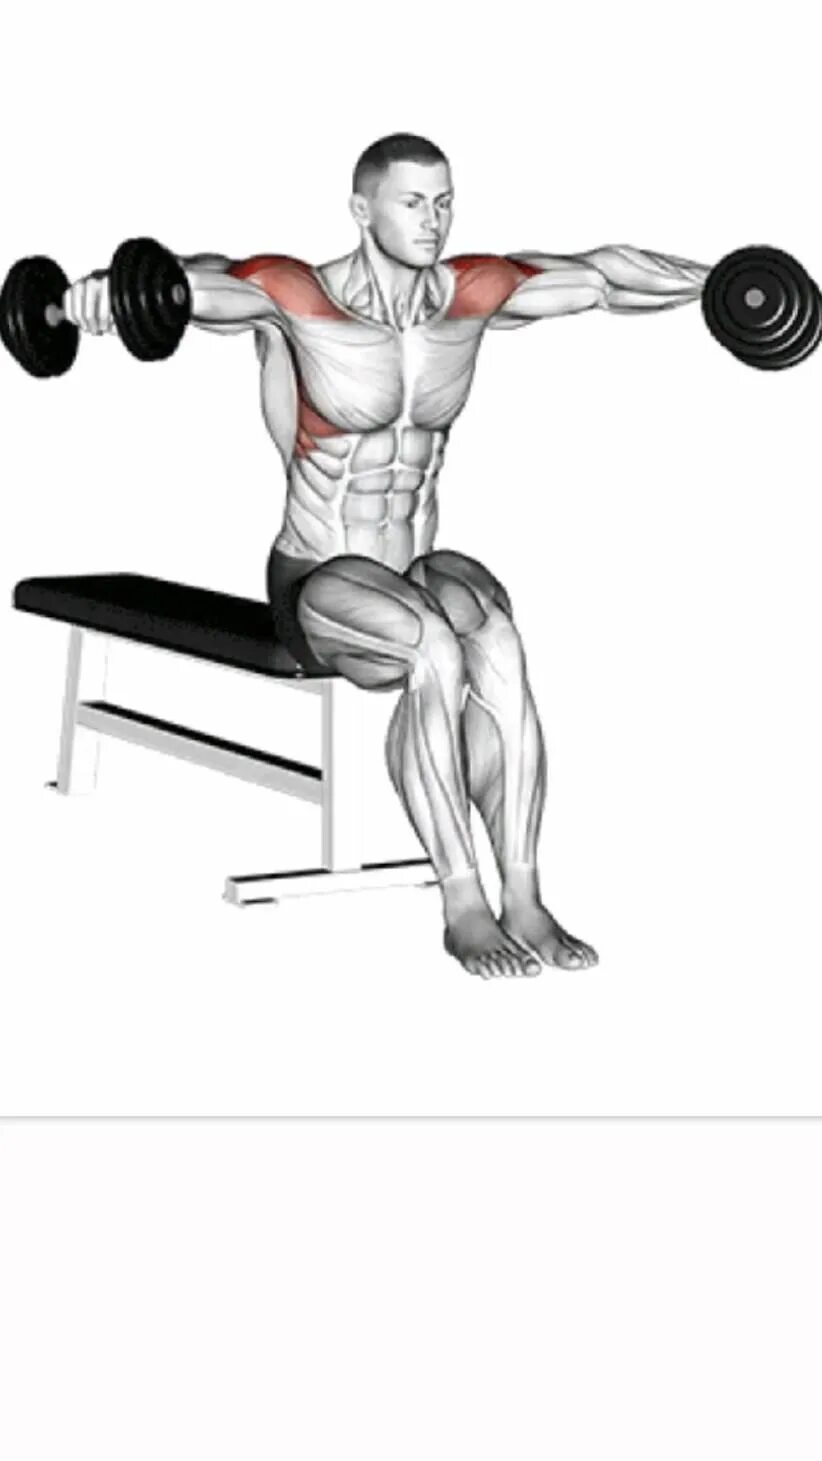 Seated Dumbbell lateral raise. Seated Rear delt Dumbbell Fly. Махи гантелями в стороны сидя. Махи в стороны мышцы. Разведение рук с гантелями в стороны